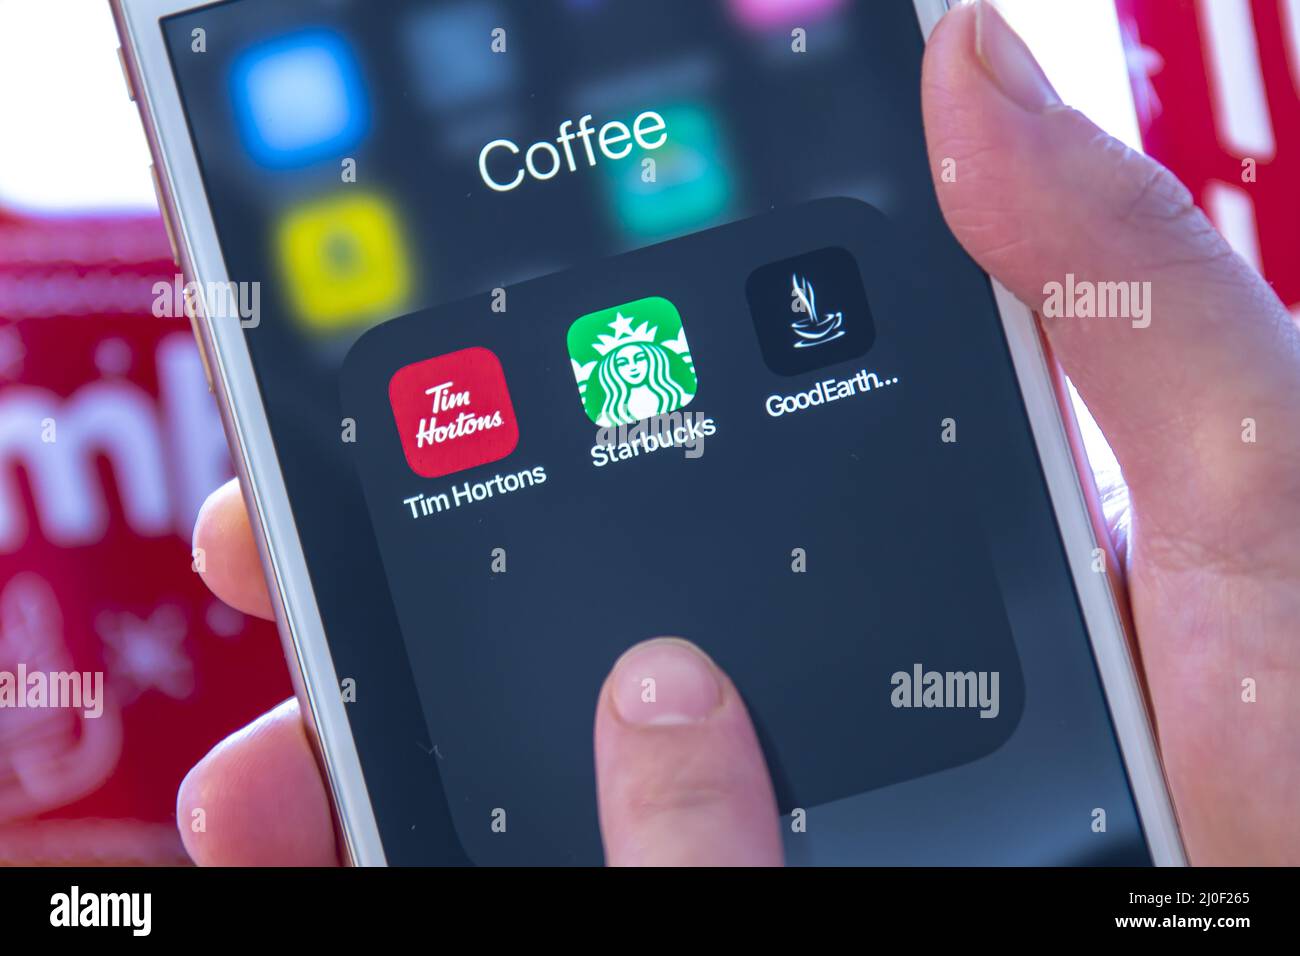 Calgary, Alberta. Canada Dec 28 2019. A person holding an iPhone looking coffee apps from Tim Hortons, Starbucks and Good Earth. Stock Photo